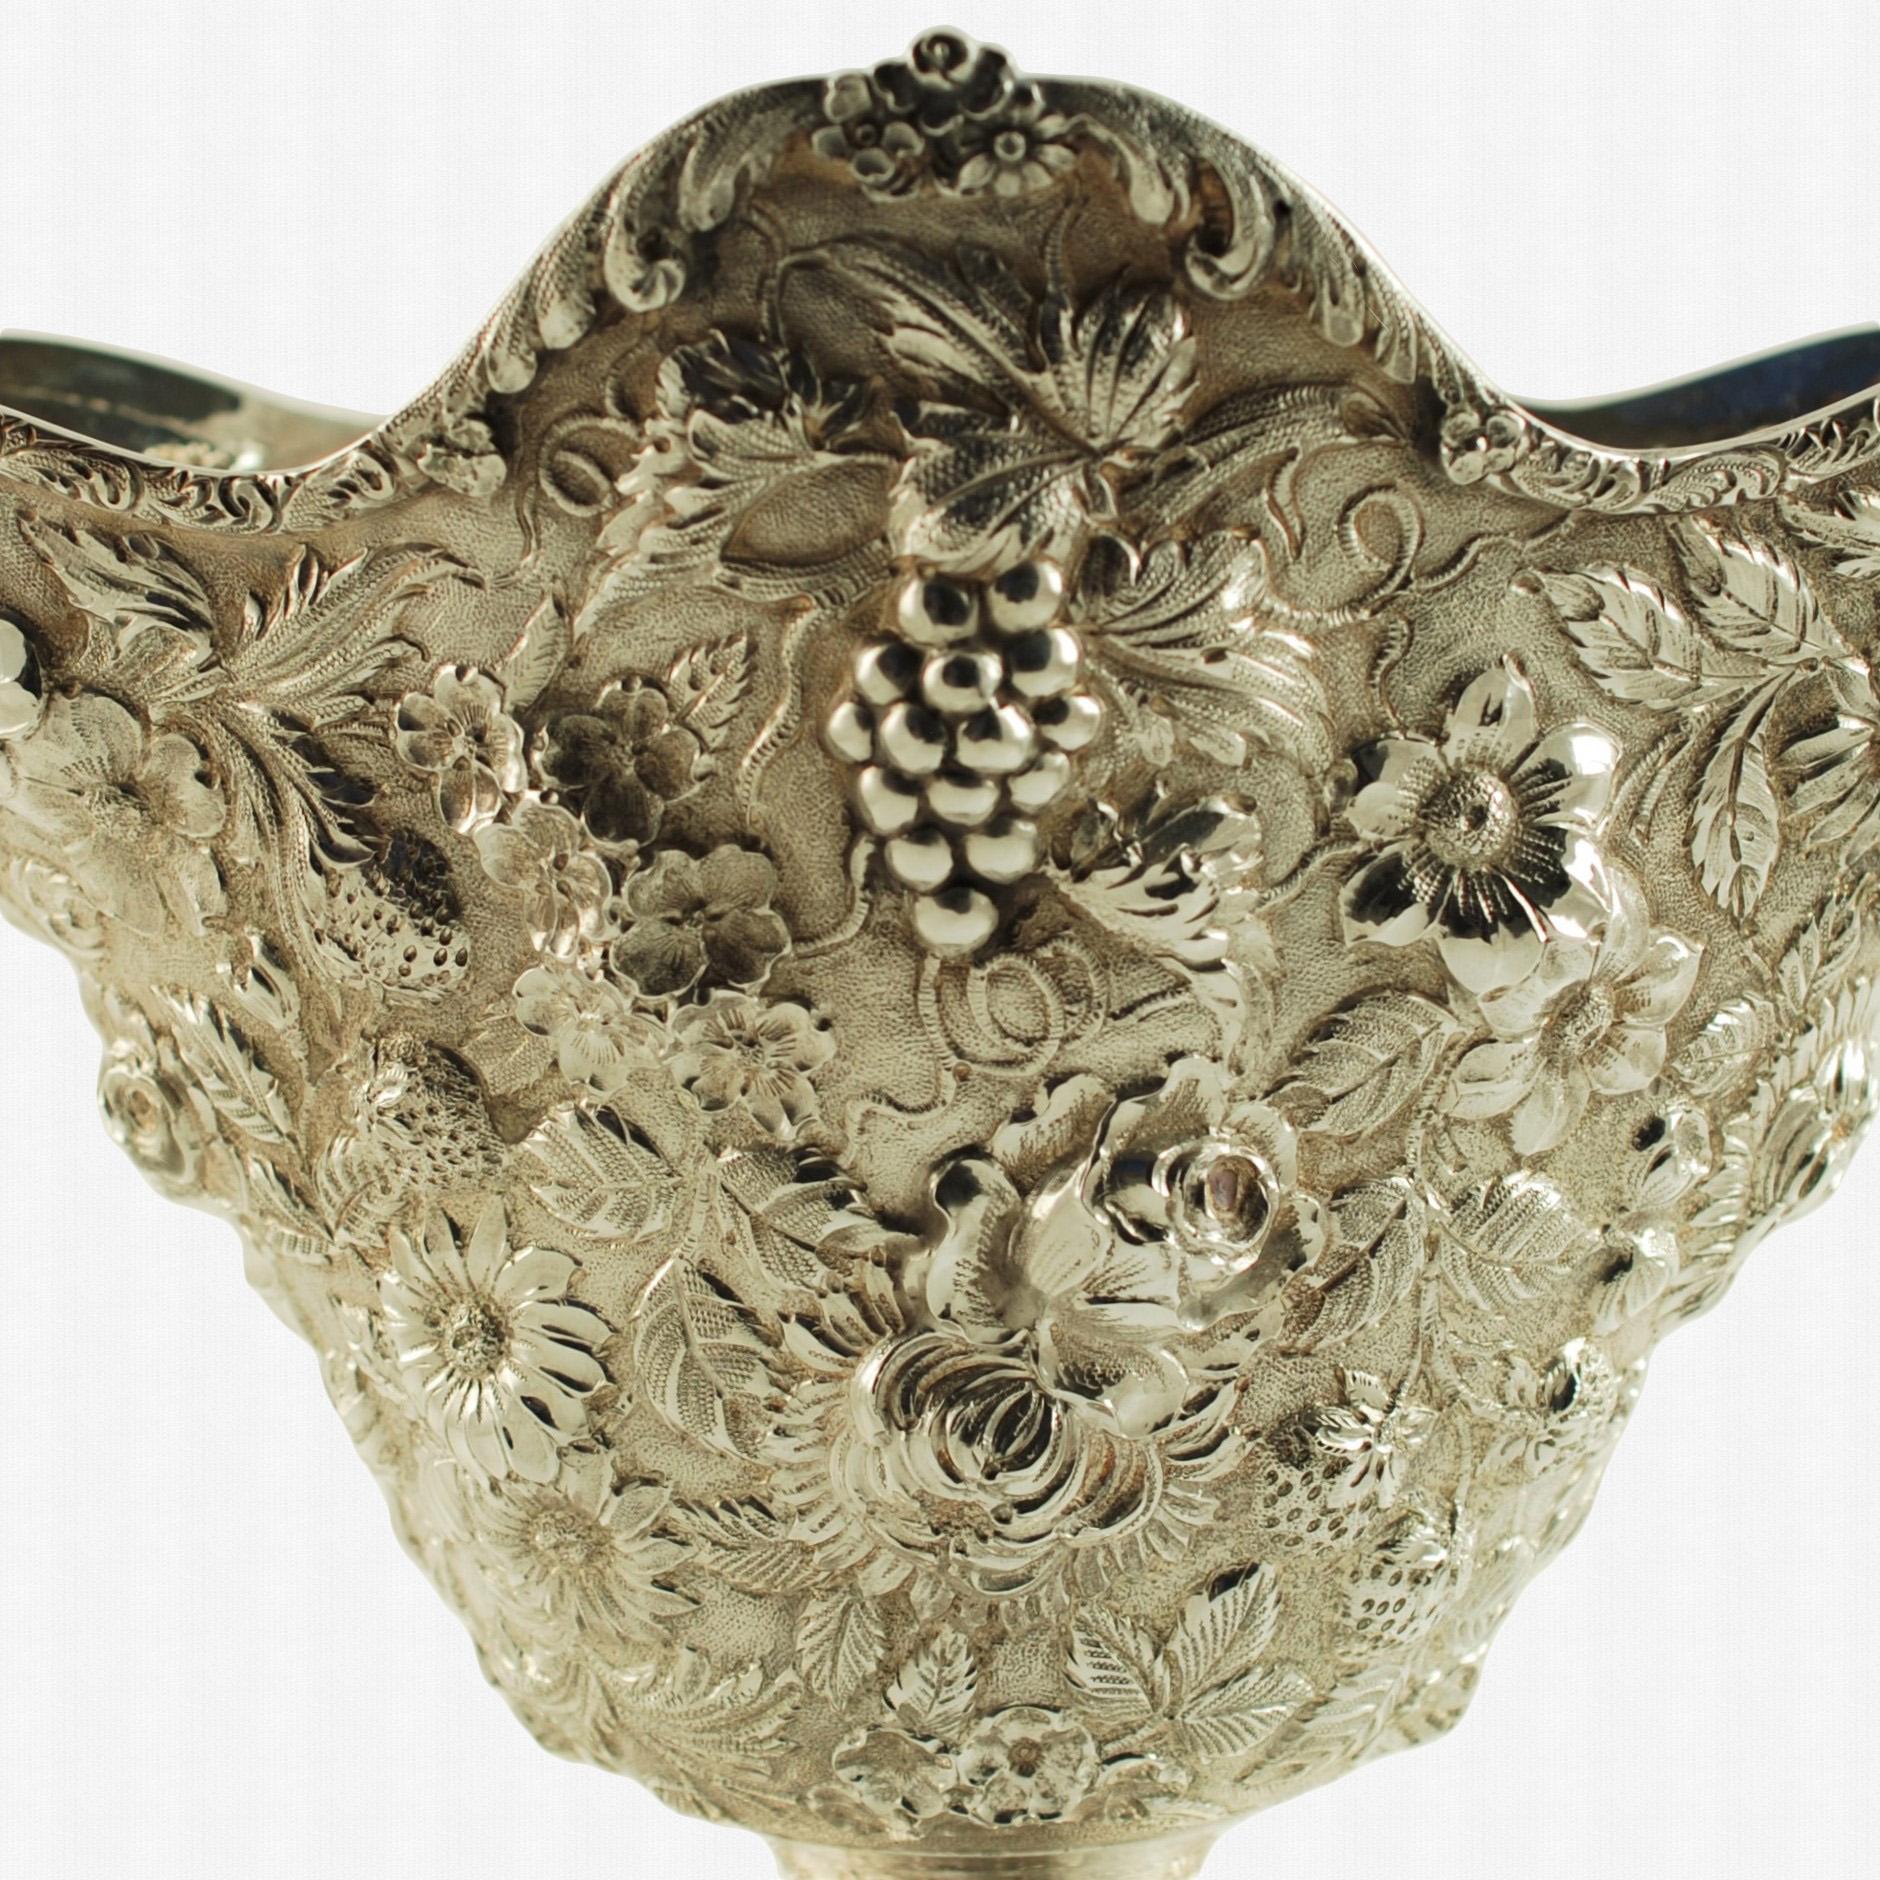 Antique Repoussé Sterling Silver Pedestal Bowl Fruit and Flower Motif In Good Condition For Sale In Cincinnati, OH